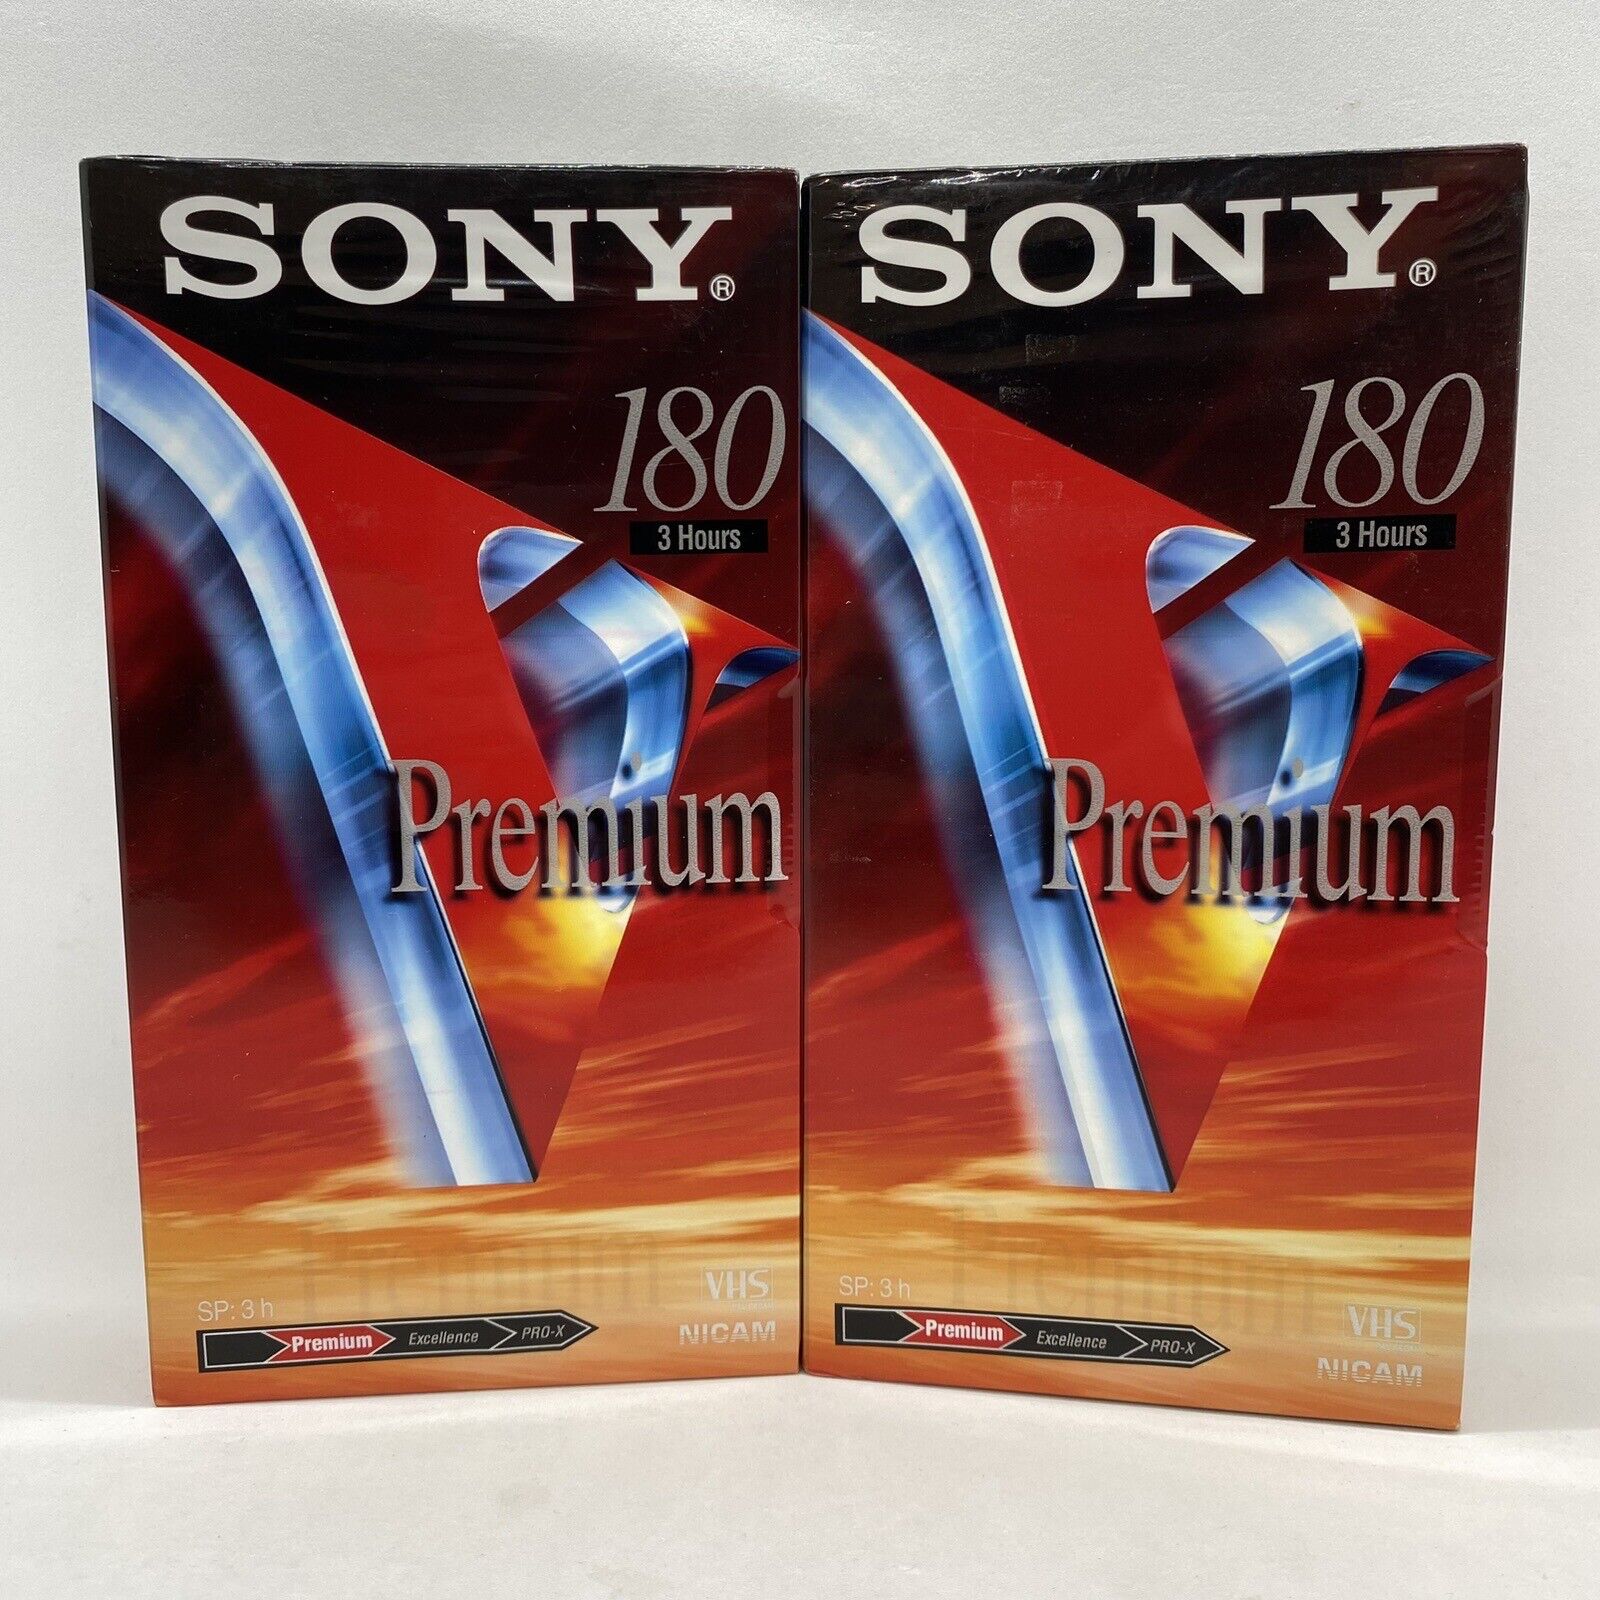 2x Sony Premuim 180 Minute 3 Hour Blank VHS Tape New & Sealed Free Tracked Post